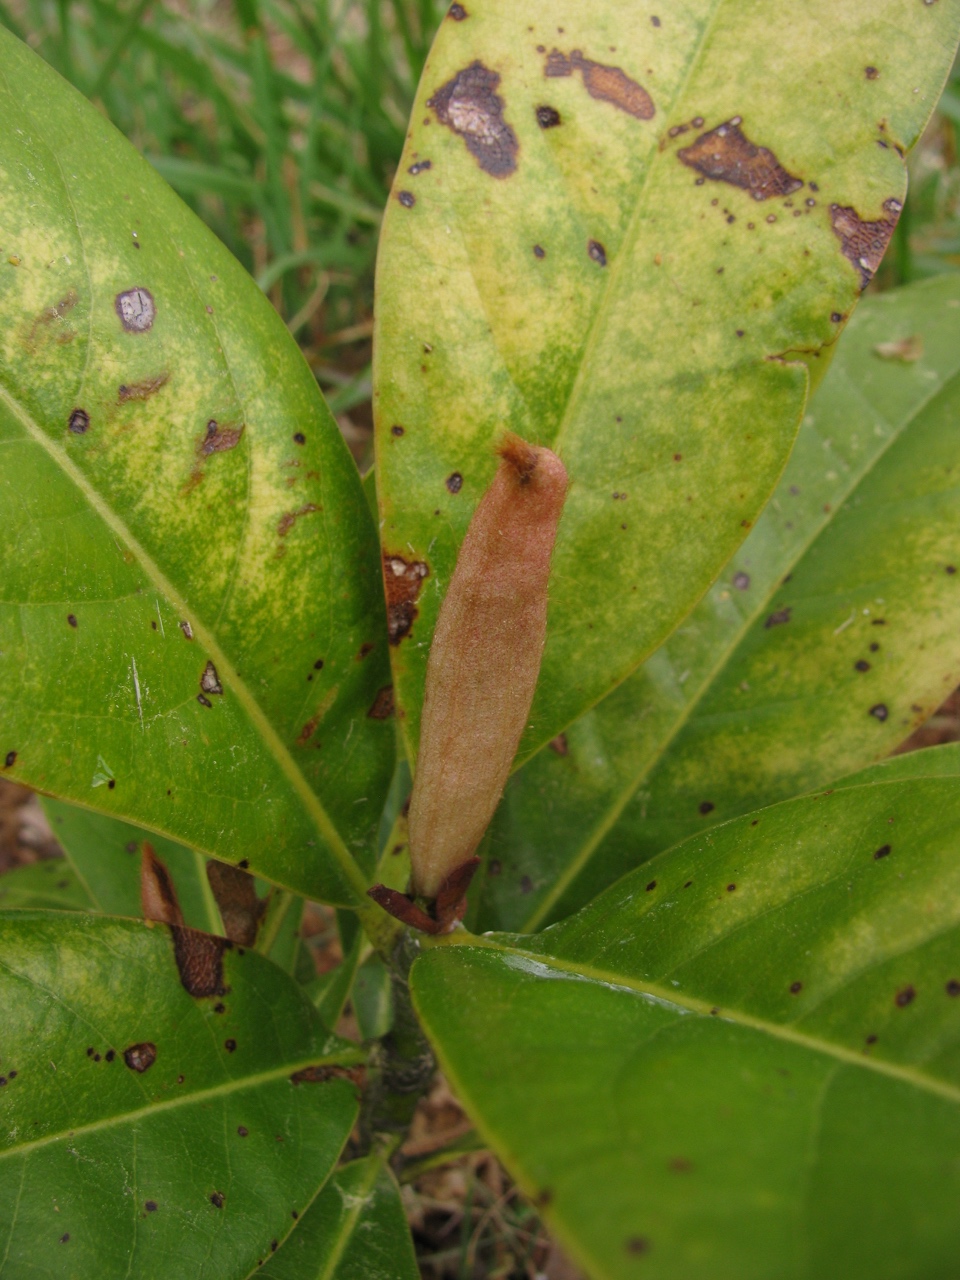 The Scientific Name is Magnolia grandiflora. You will likely hear them called Southern Magnolia, Bull Bay. This picture shows the Close-up of expanded terminal bud in mid-April of Magnolia grandiflora